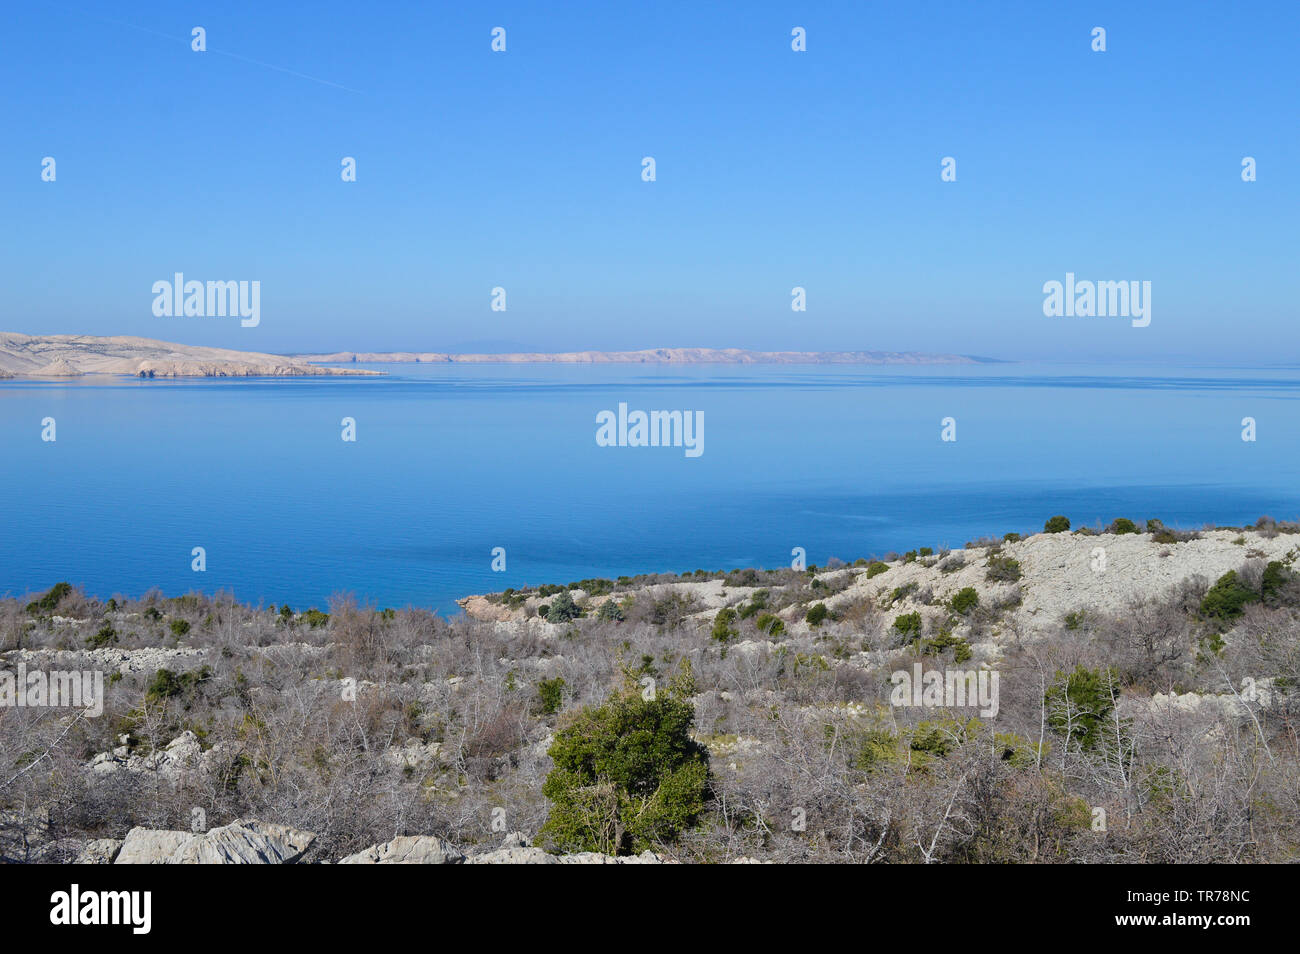 Scenic landscape at Northern Adriatic Sea, calm water, clear blue sky Stock Photo